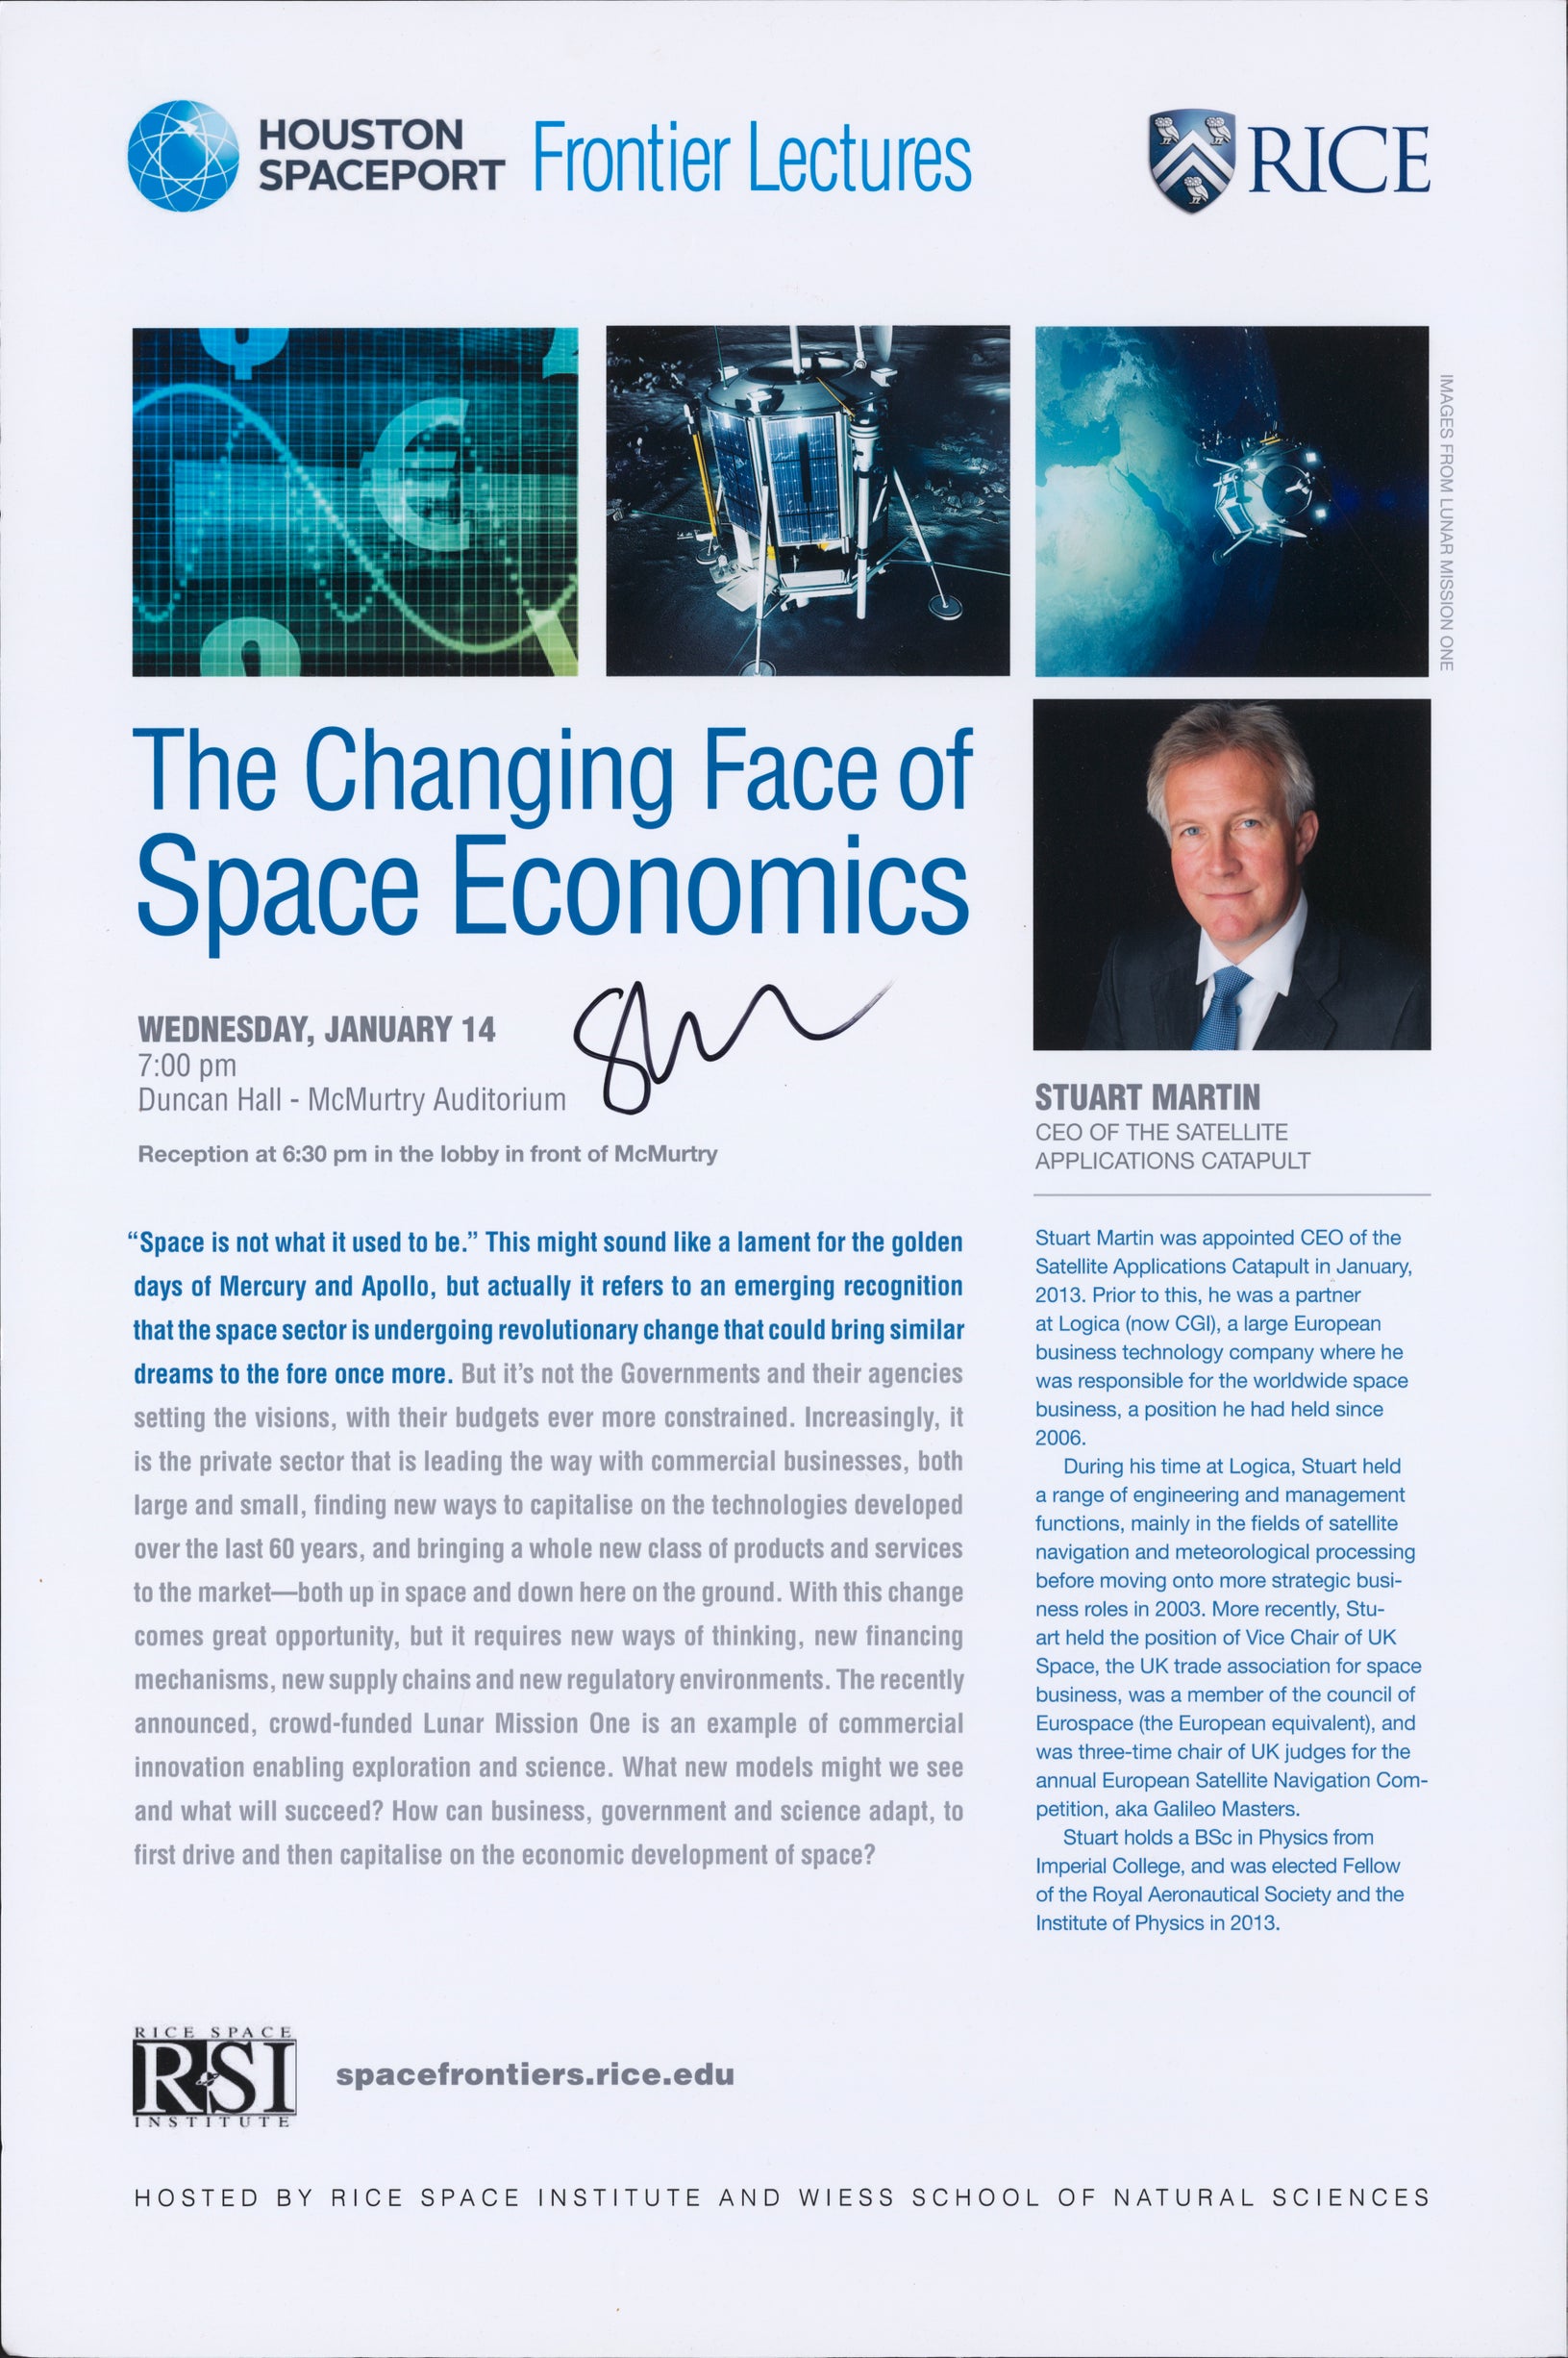 Poster of "The Changing Face of Space Economics" by Stuart Martin